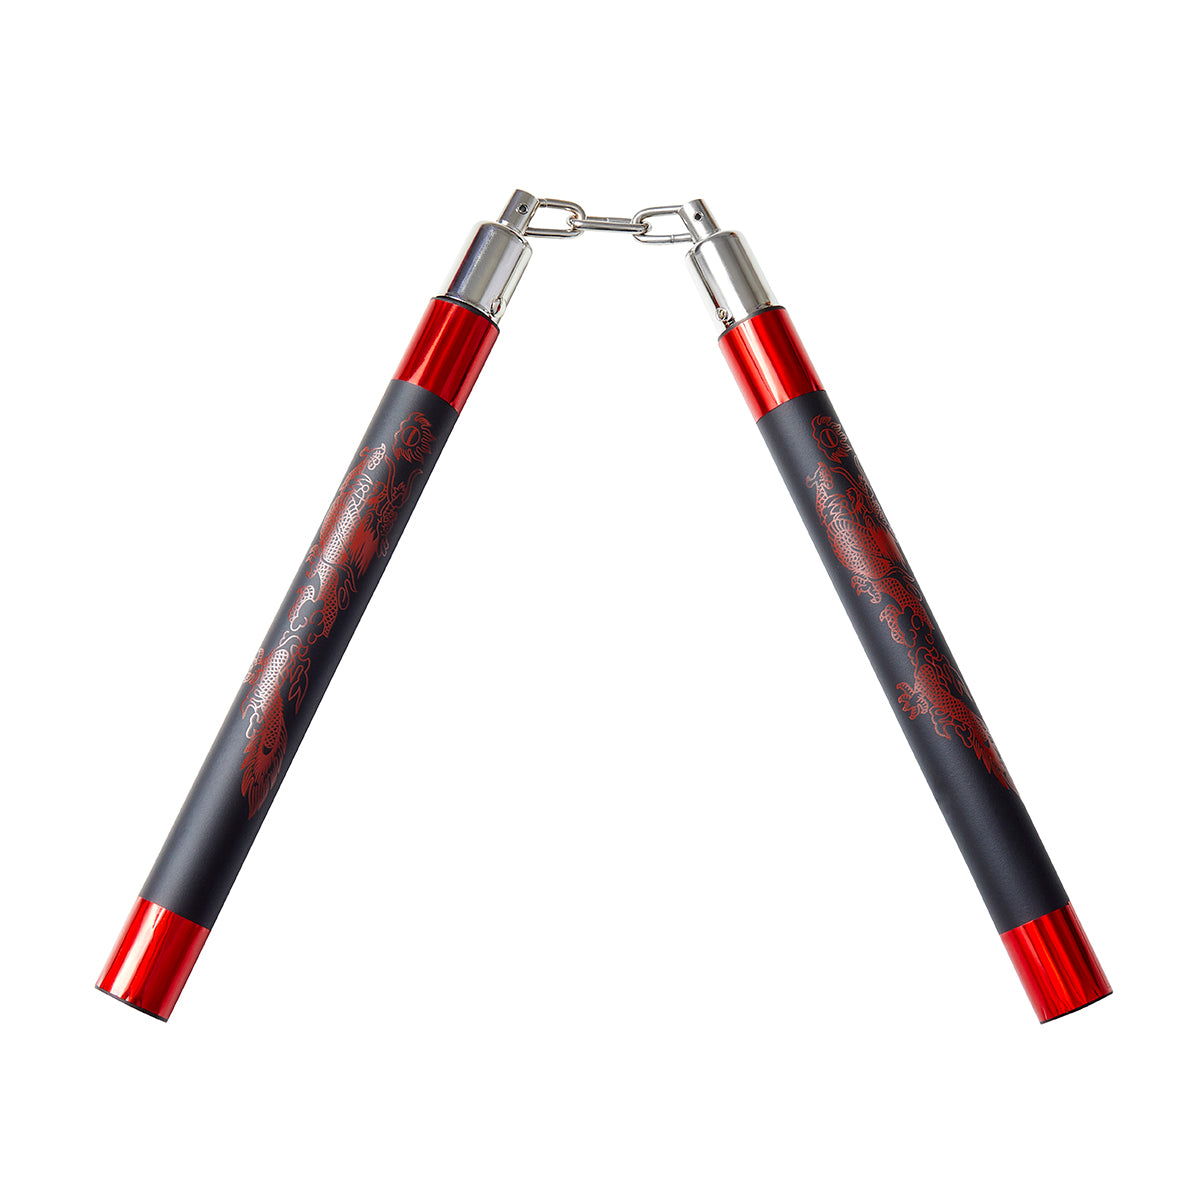 Deluxe Foam Speed Nunchucks With Chain - Black/Red - 9"